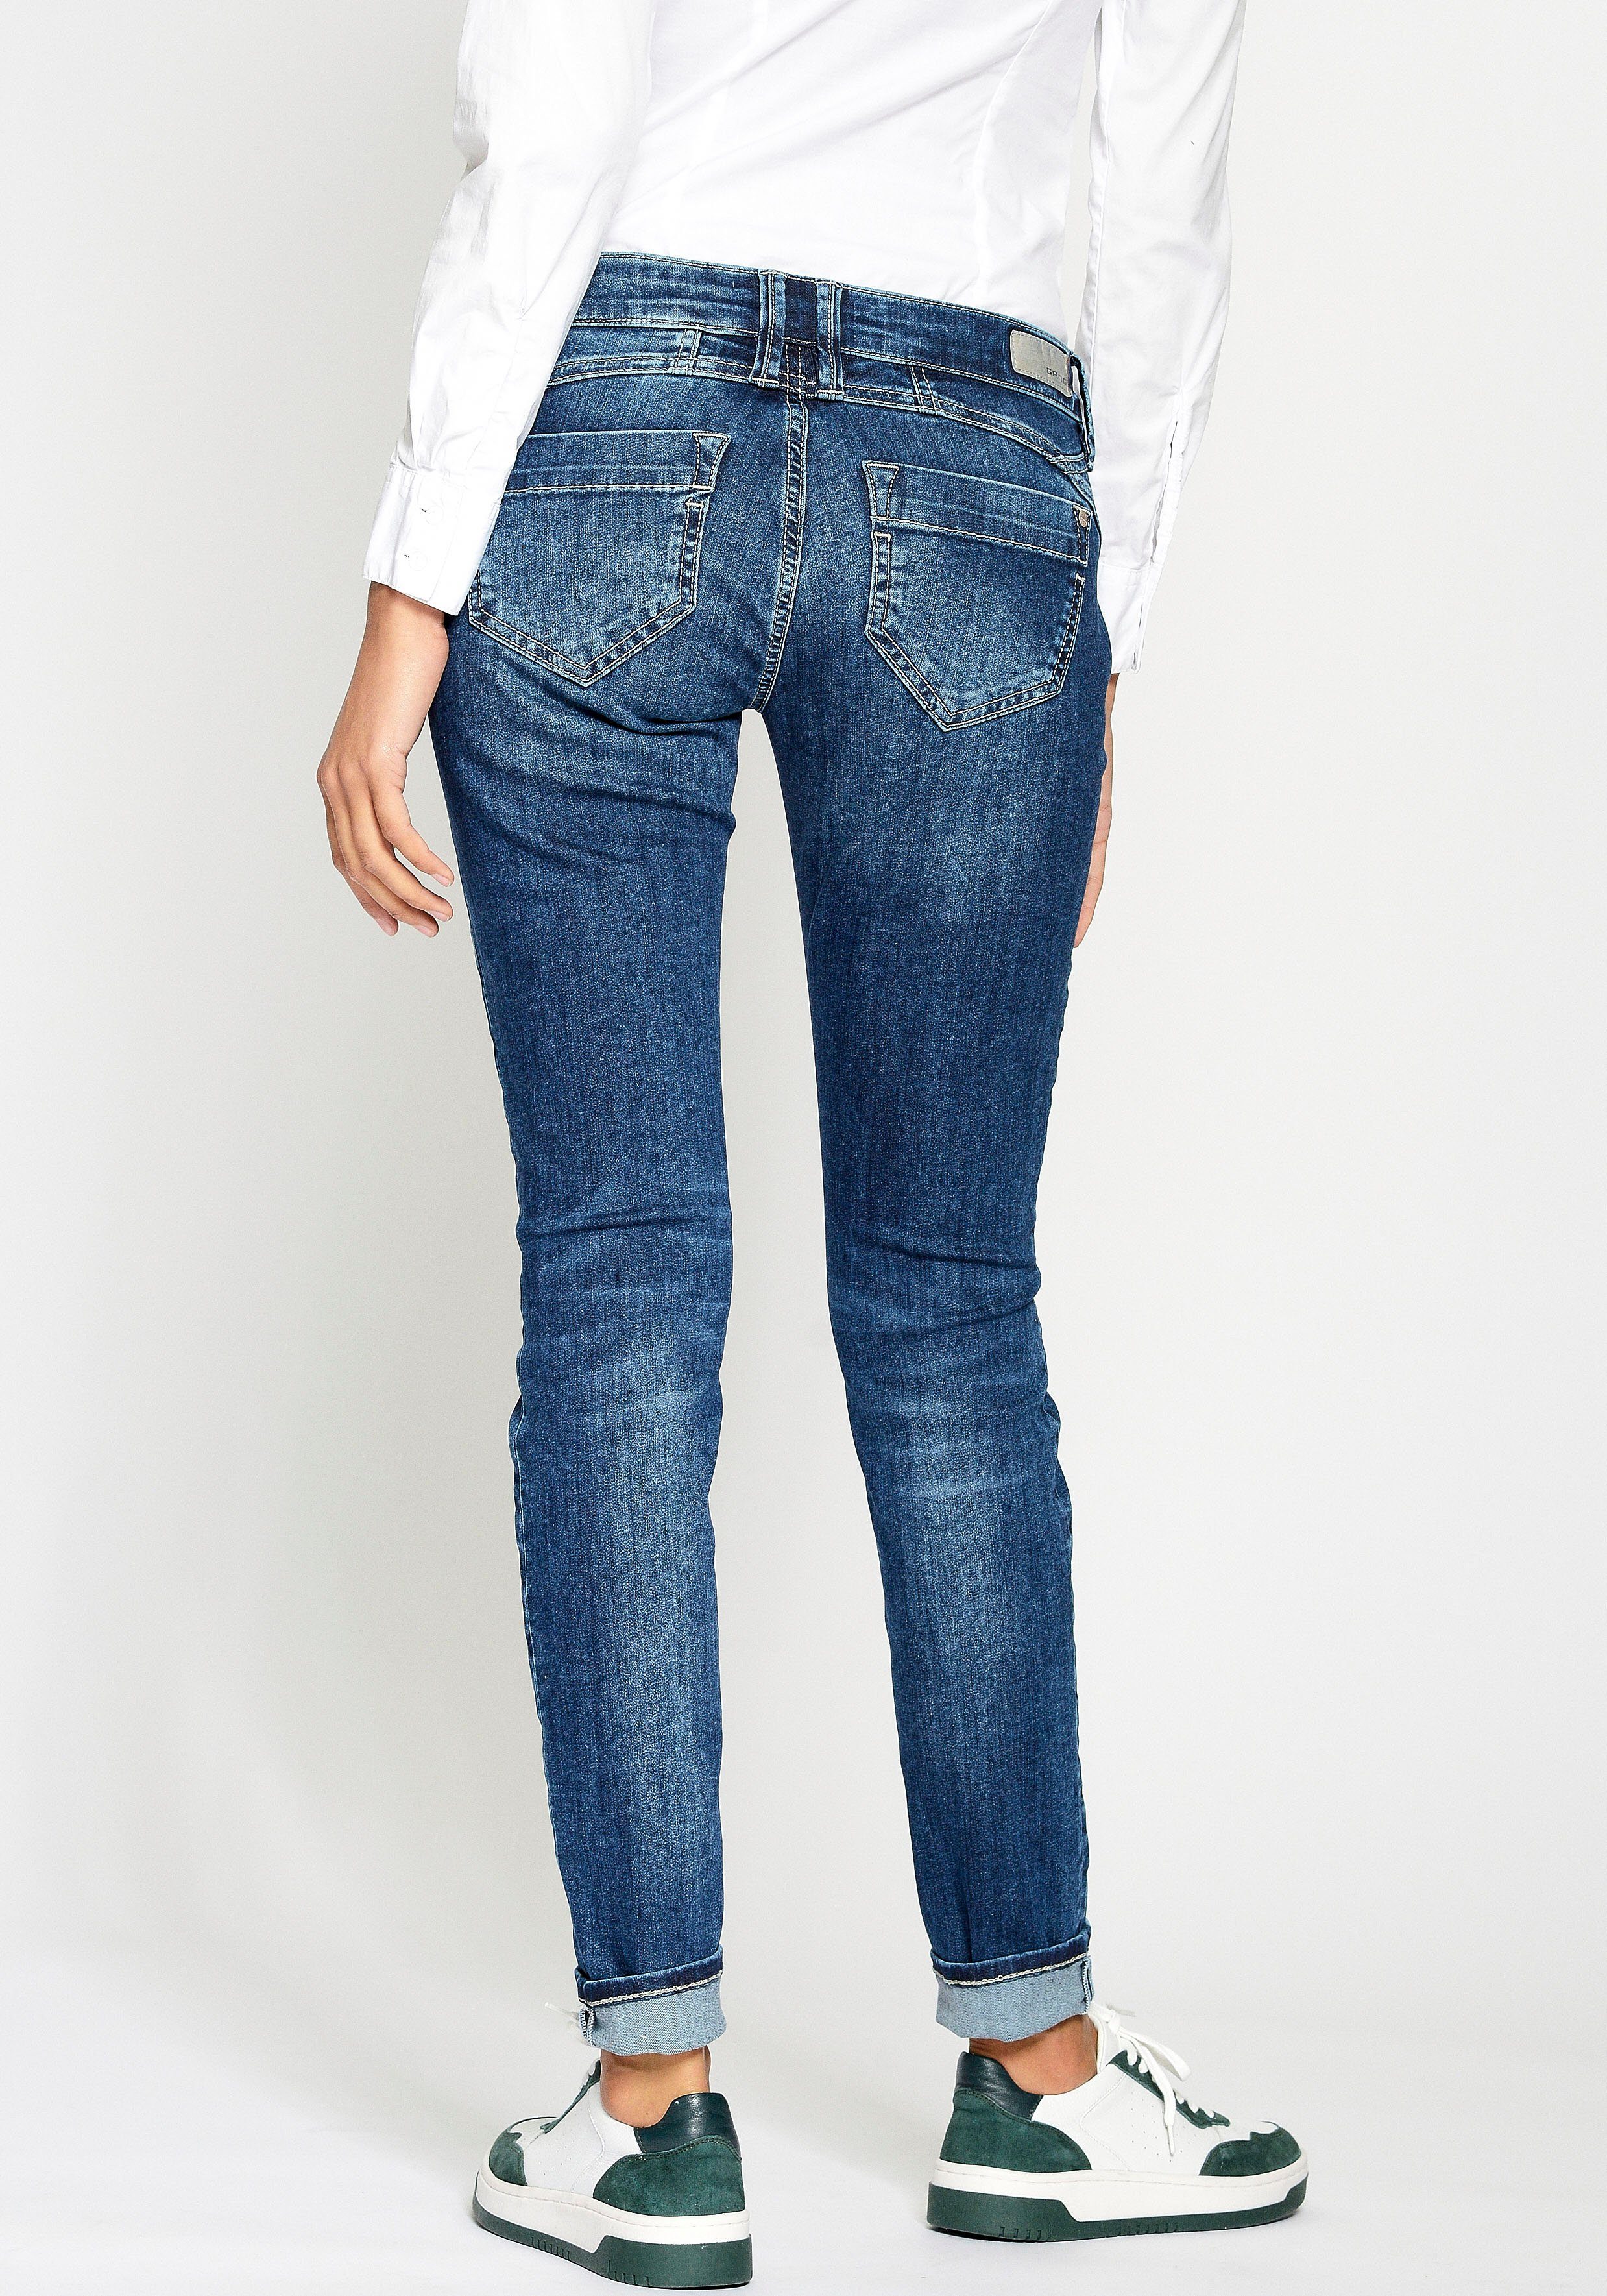 GANG Skinny-fit-Jeans 94Nena in mid authenischer blue Used-Waschung